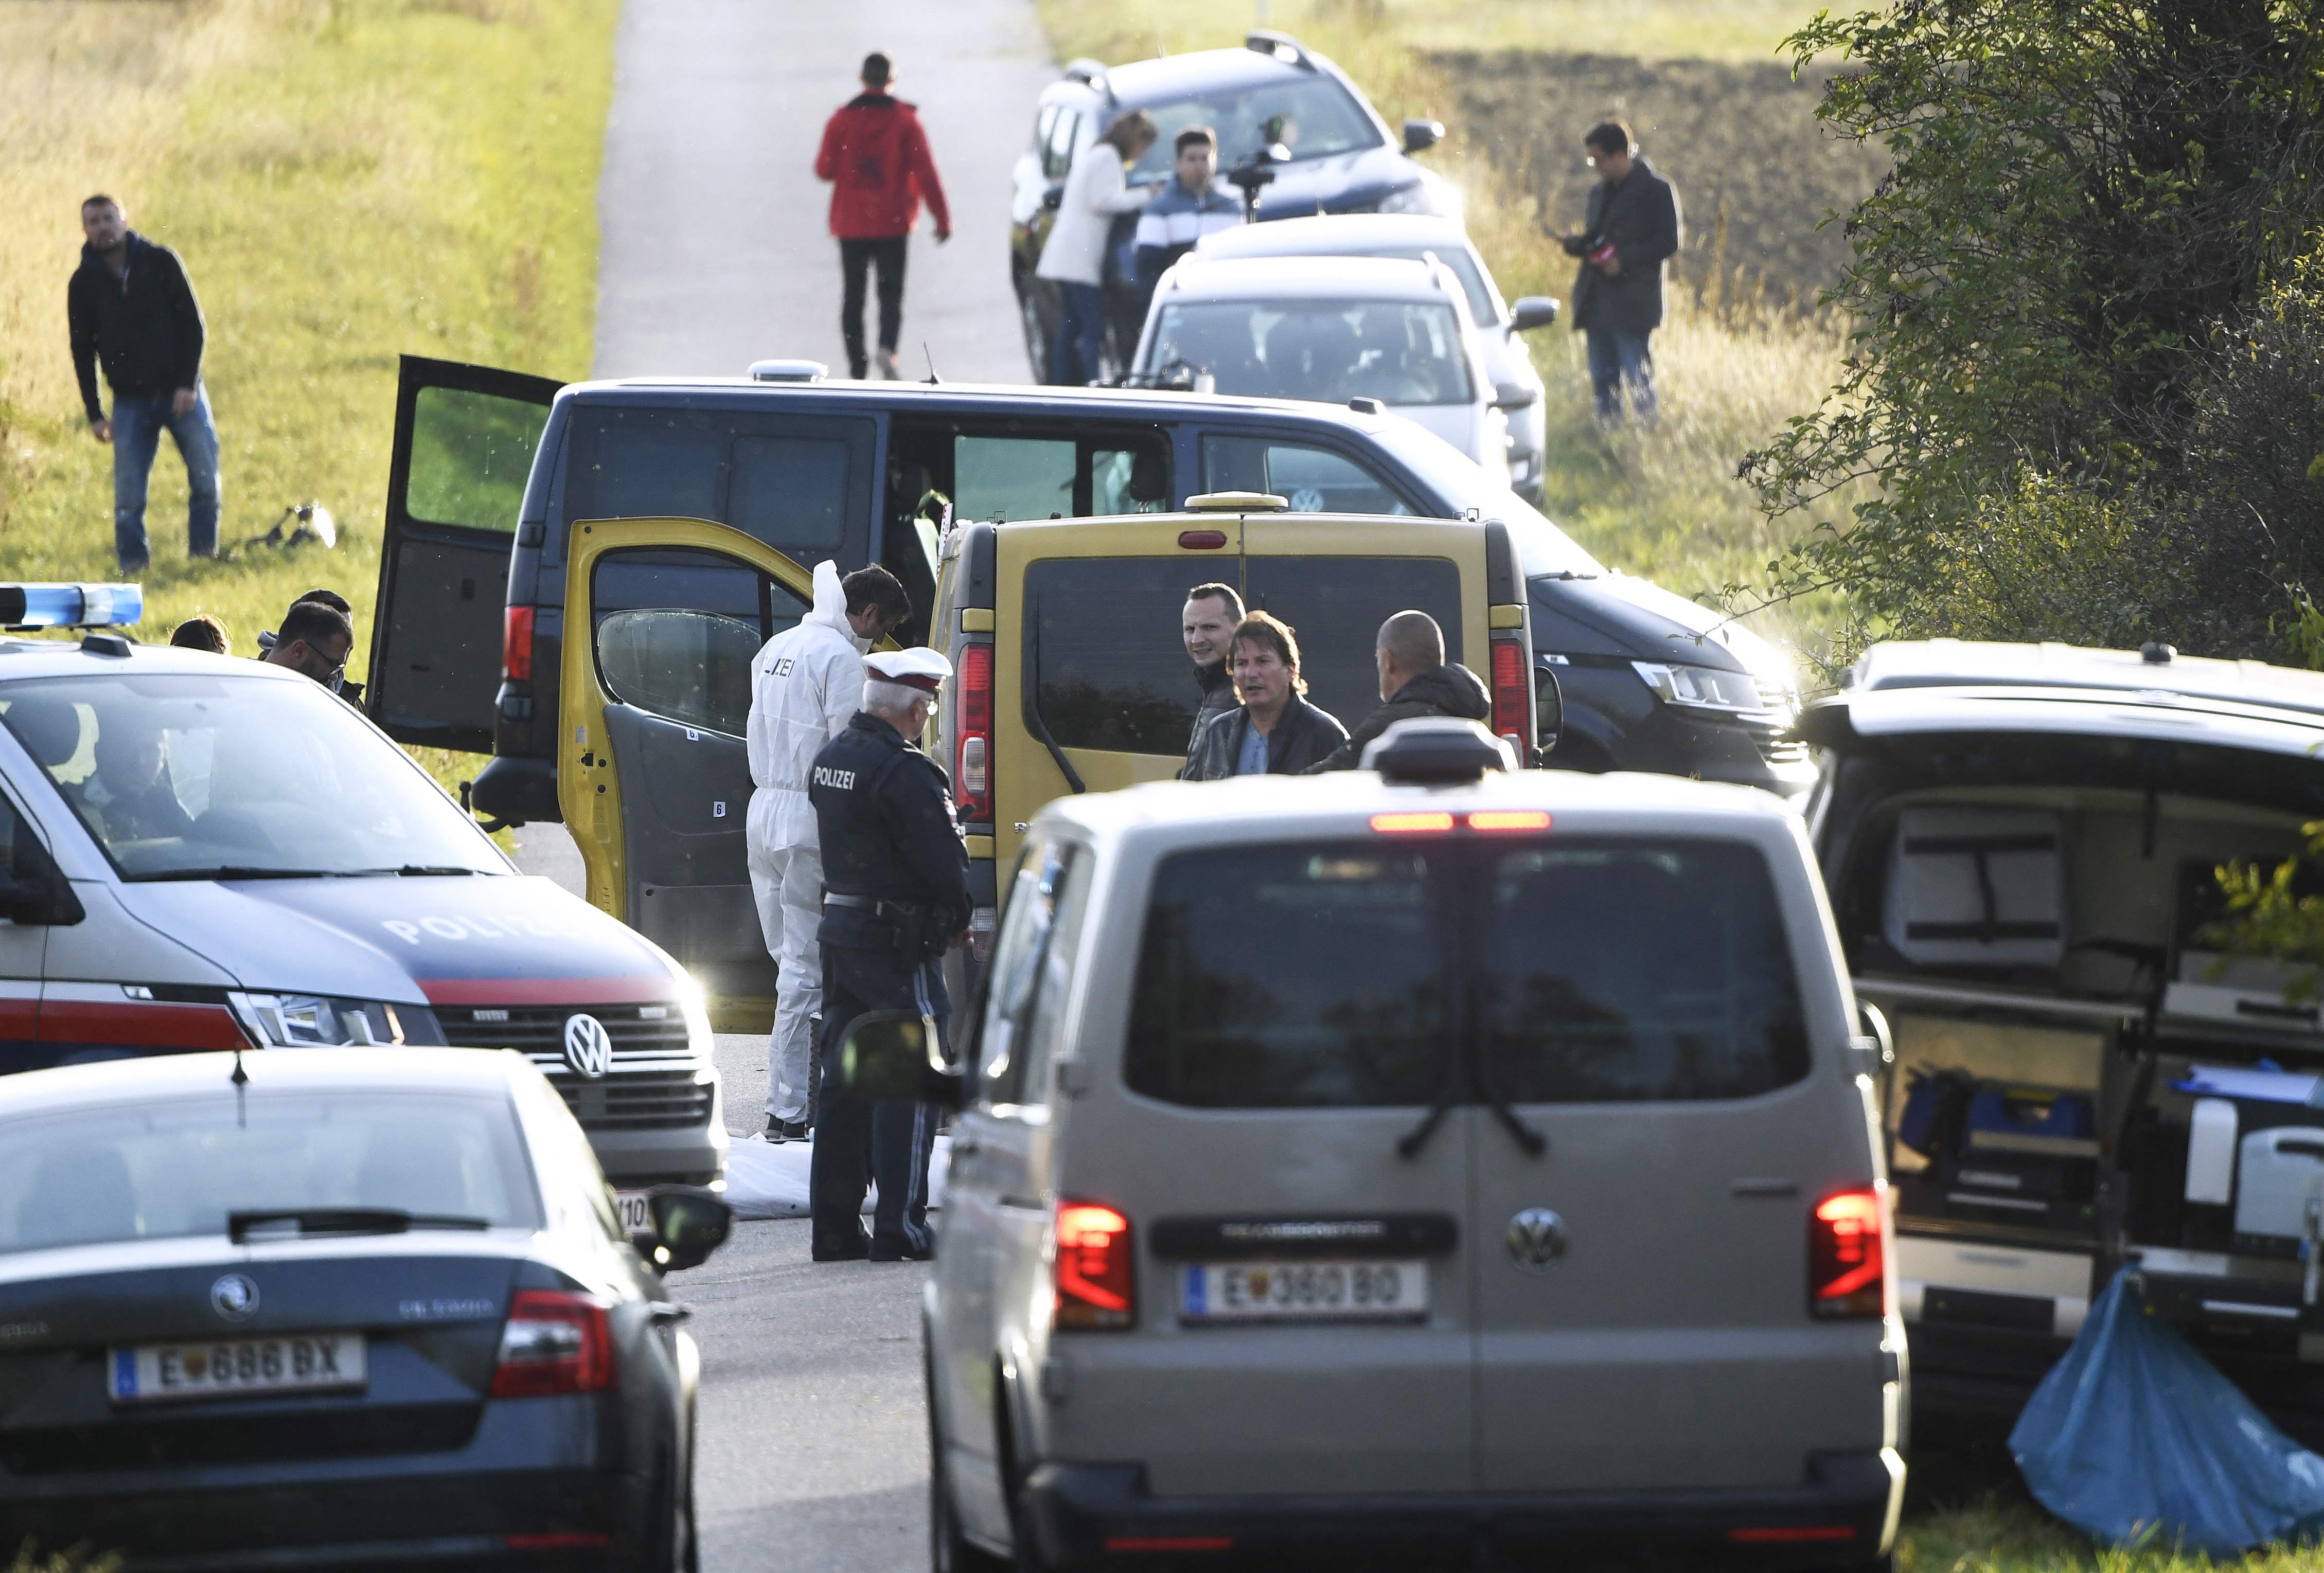 Austrian police are seen near the Austrian-Hungarian border where two refugees were discovered dead inside the yellow van pictured.